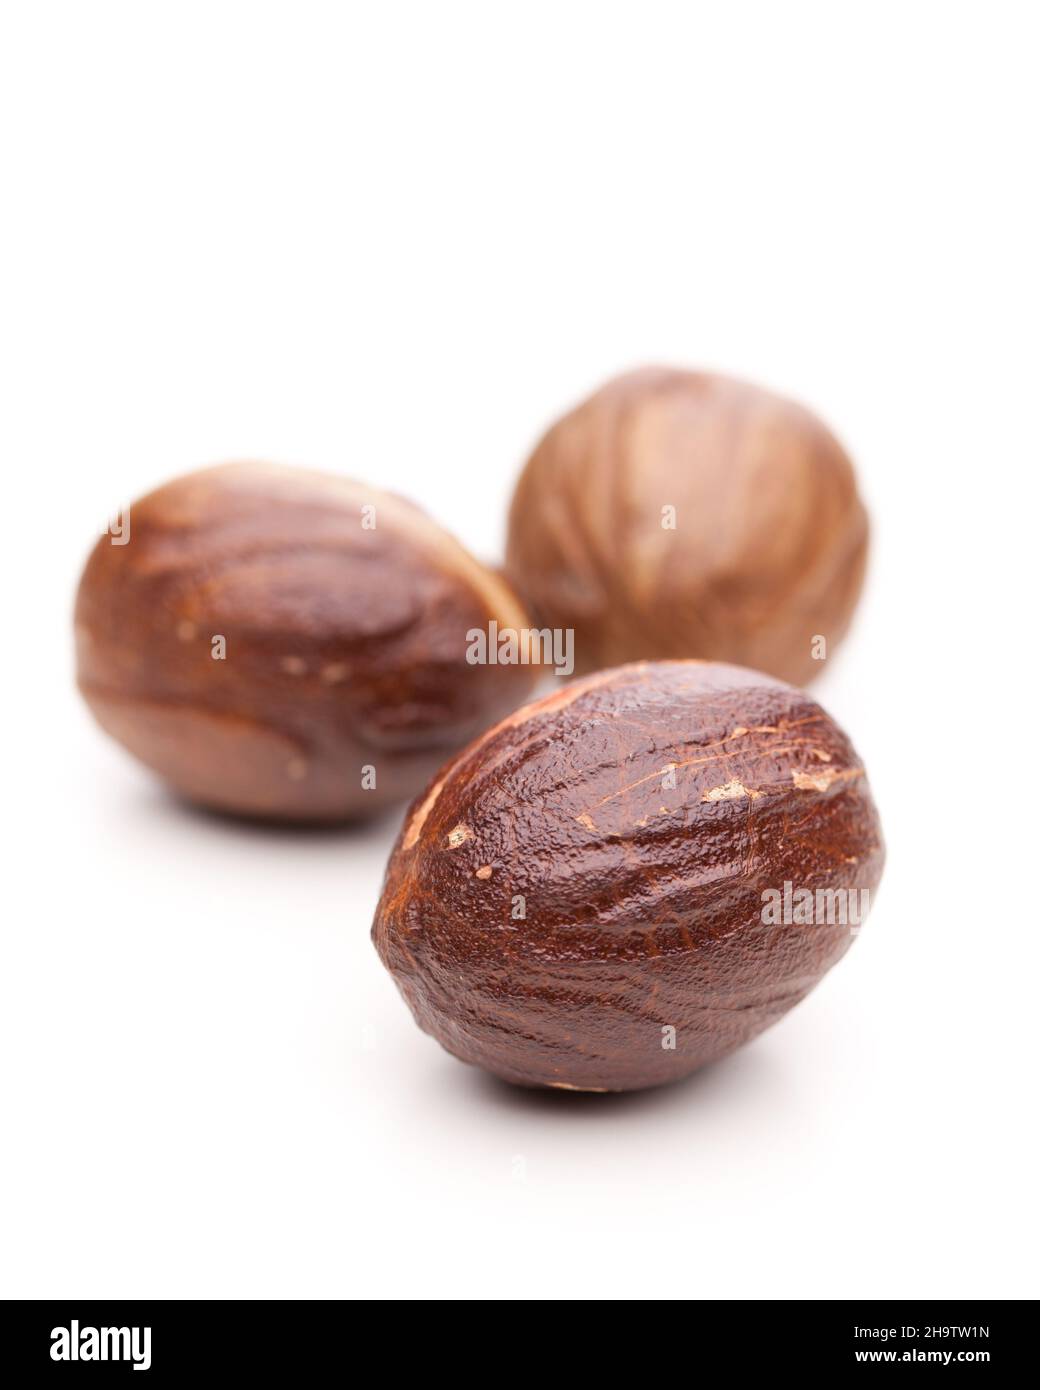 nutmeg, nuts, whole, details, background, close-up, one behind the other, white, behind, spice, nut, smooth, back, detail, isolated, brown, surface, b Stock Photo